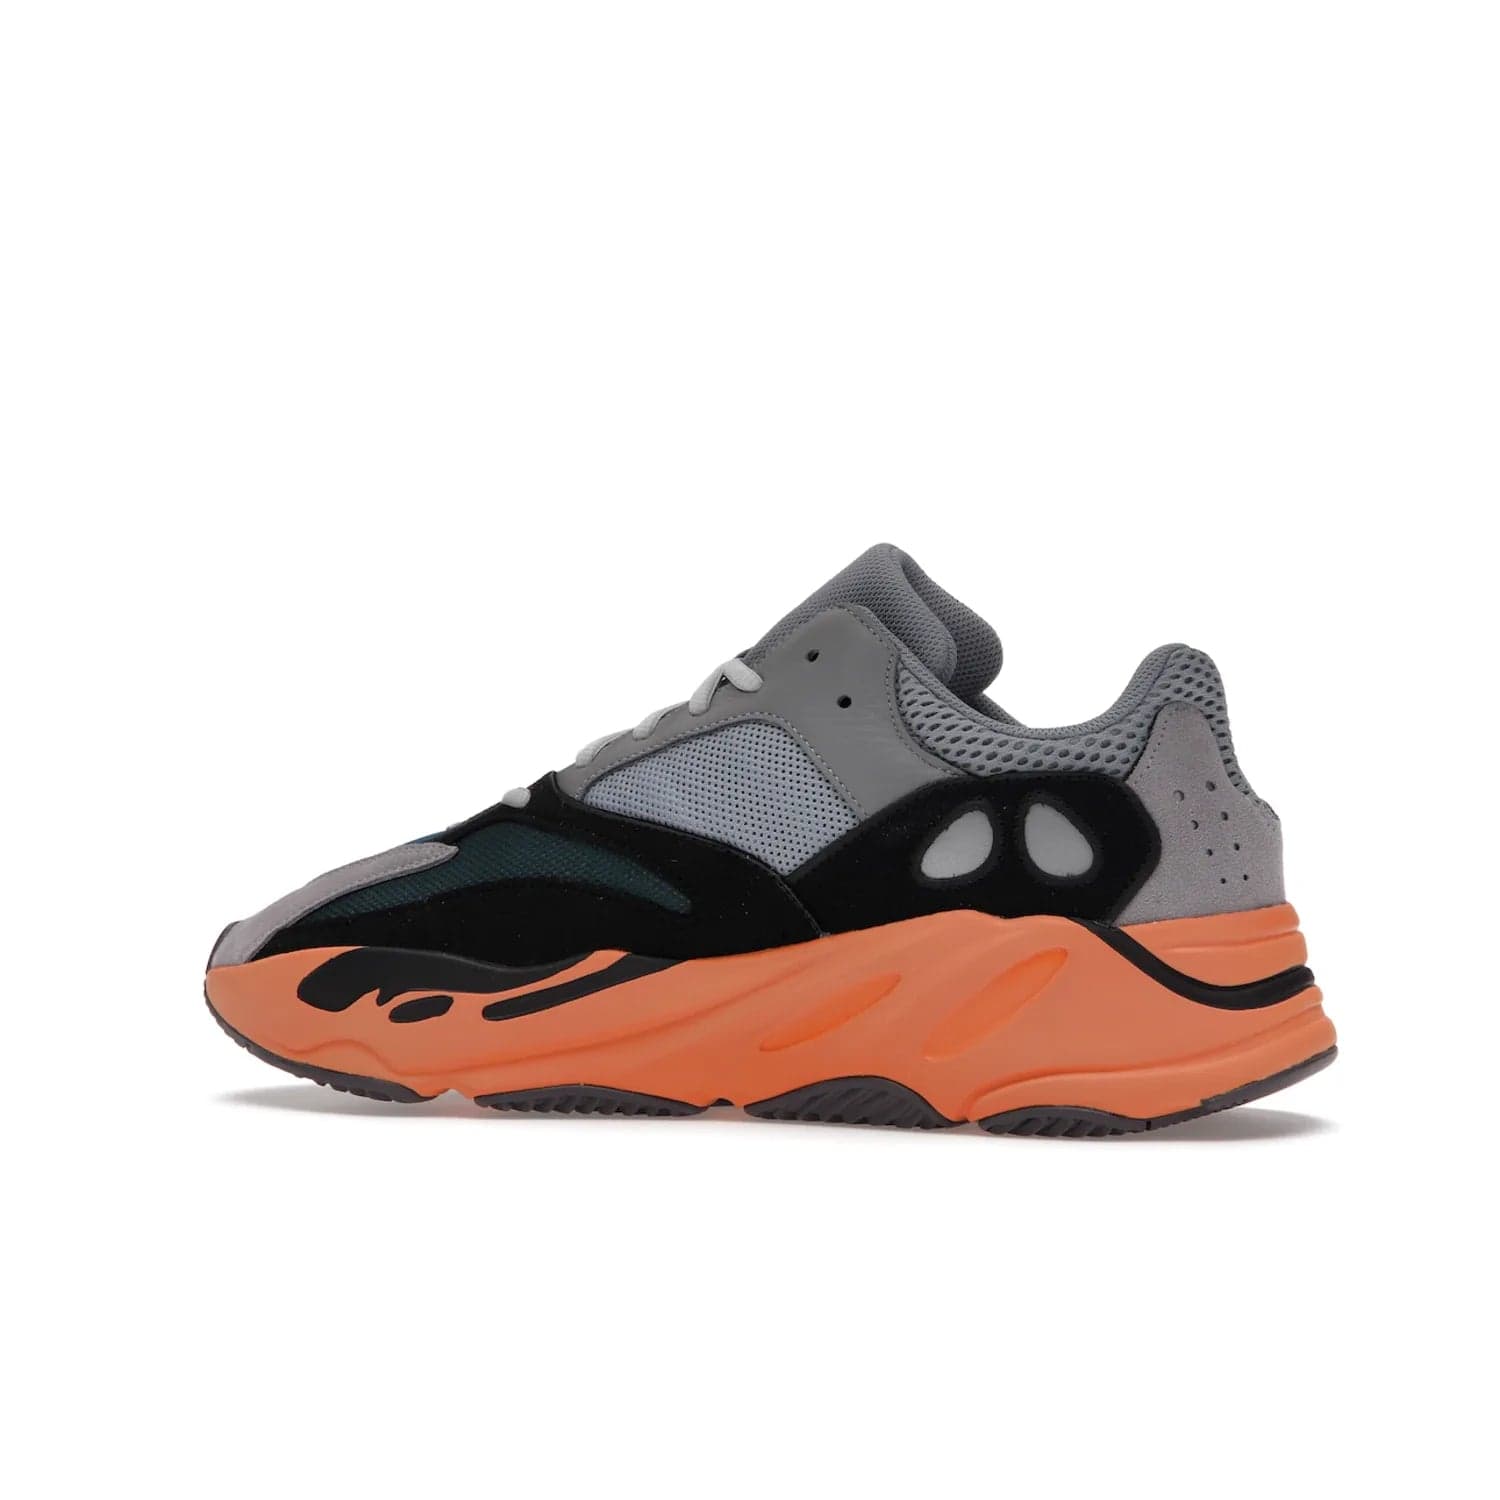 adidas Yeezy Boost 700 Wash Orange - Image 21 - Only at www.BallersClubKickz.com - Introducing the adidas Yeezy Boost 700 Wash Orange. Unique grey leather, suede, mesh upper and teal panels with a chunky Wash Orange Boost midsole. Release October 2021, make a statement today!